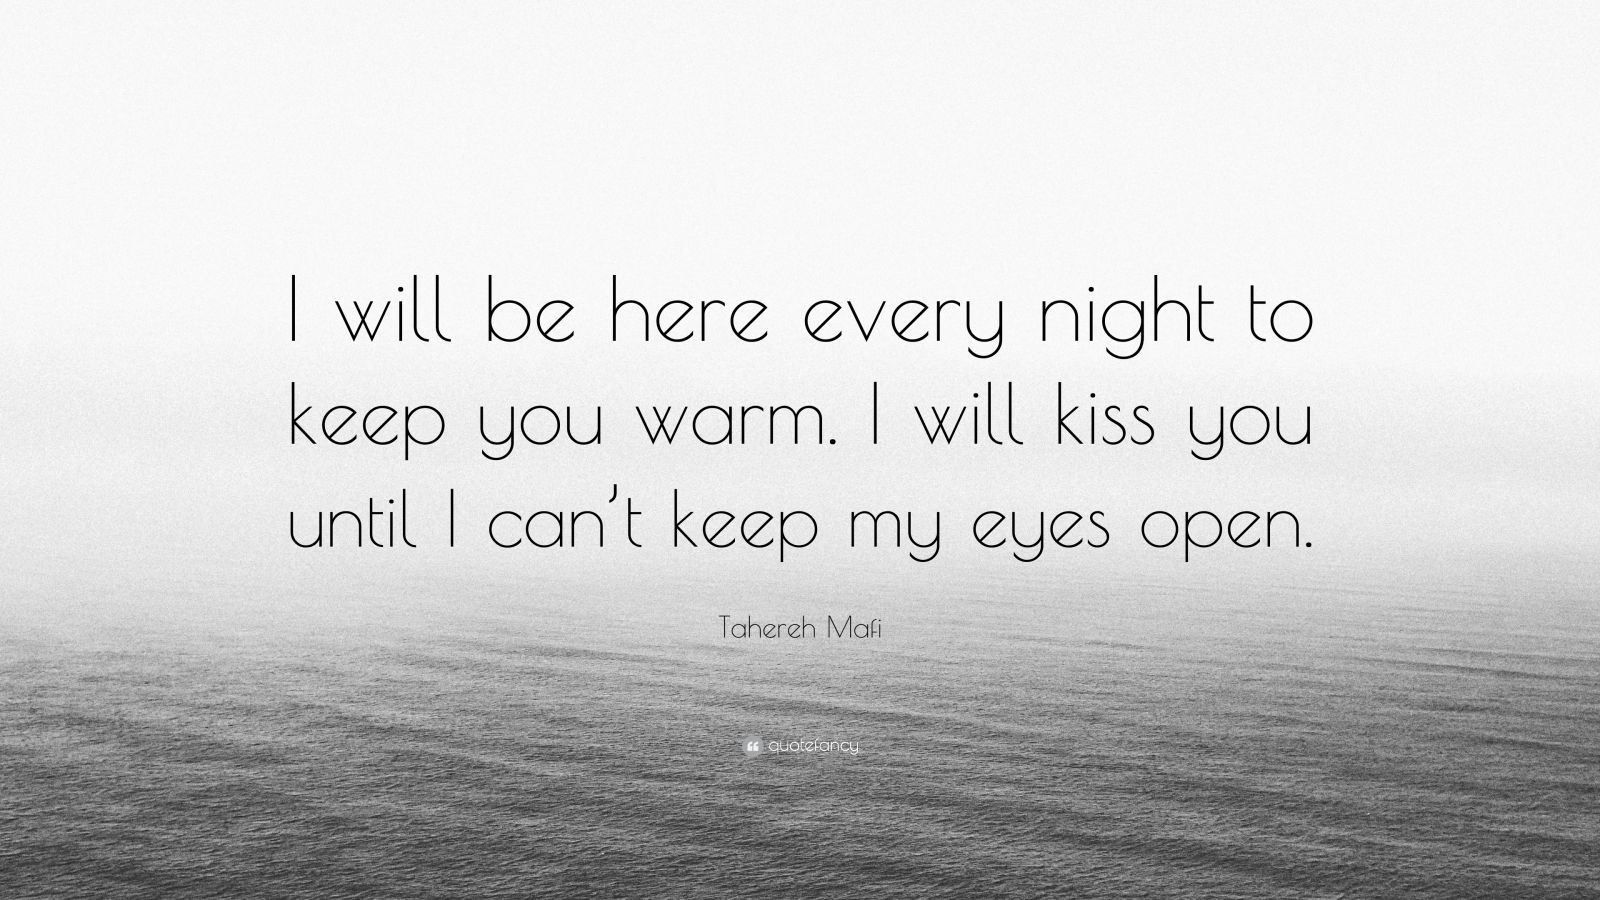 Tahereh Mafi Quote: “I will be here every night to keep you warm. I ...